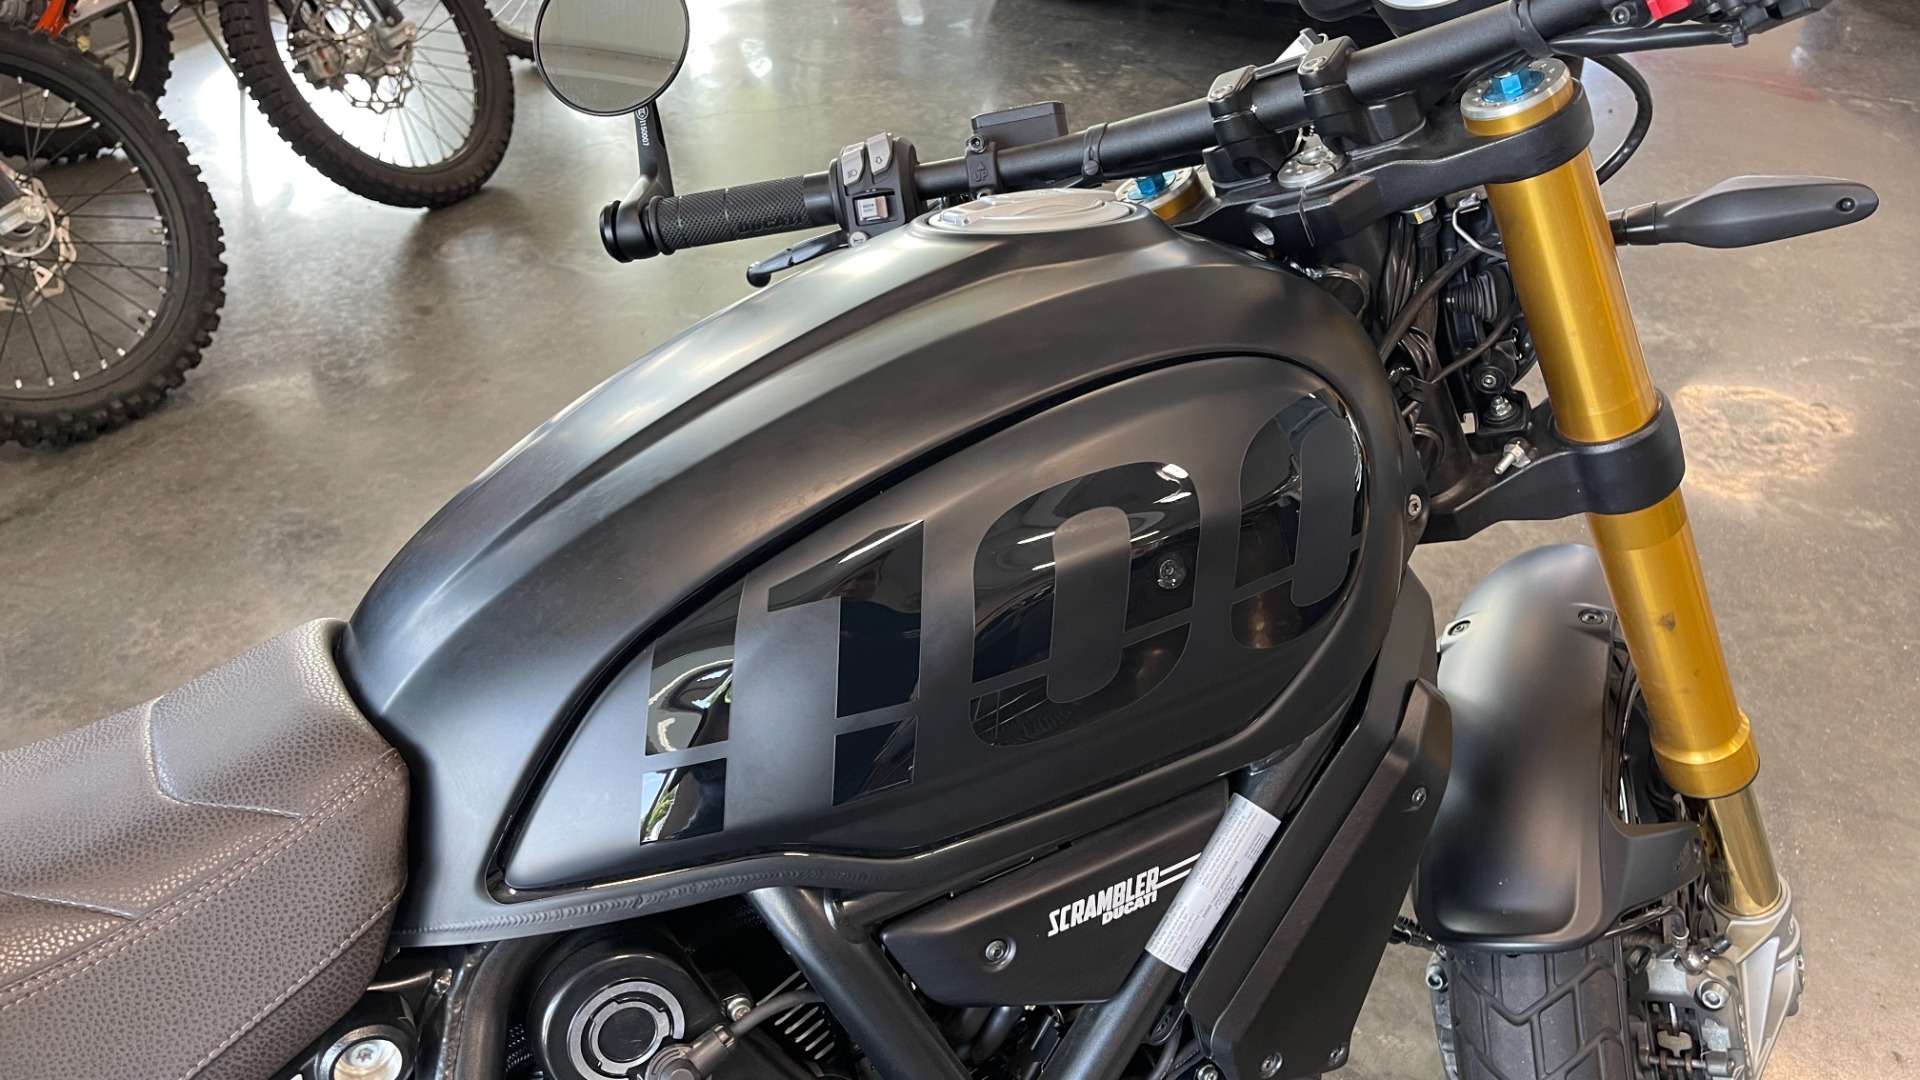 Used 2020 DUCATI SCRAMBLER 1100 SPORT PRO for sale Sold at Formula Imports in Charlotte NC 28227 24